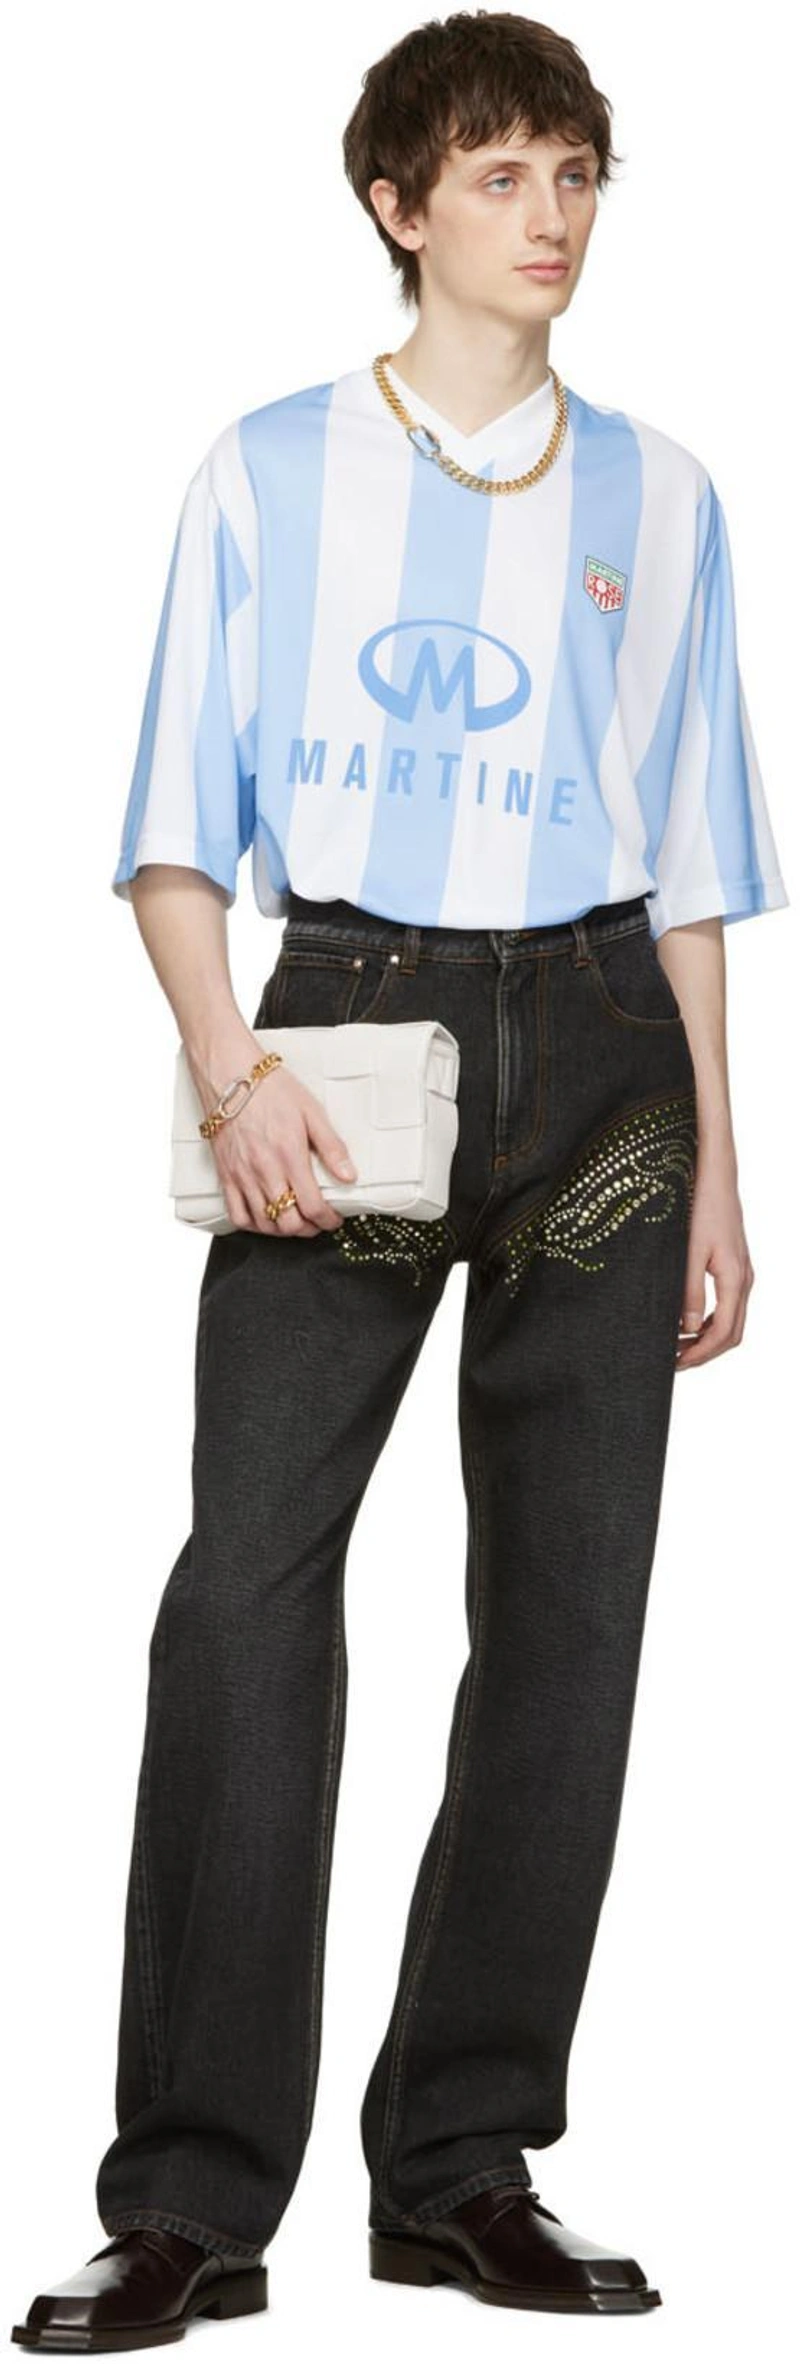 SSENSE's Post | 搭配: Bottega Veneta Off-white Cassette Bag In 9007 White；Y/project Ssense Exclusive Black Crystal Jeans；Martine Rose 斜纹科技织物足球t恤 In White